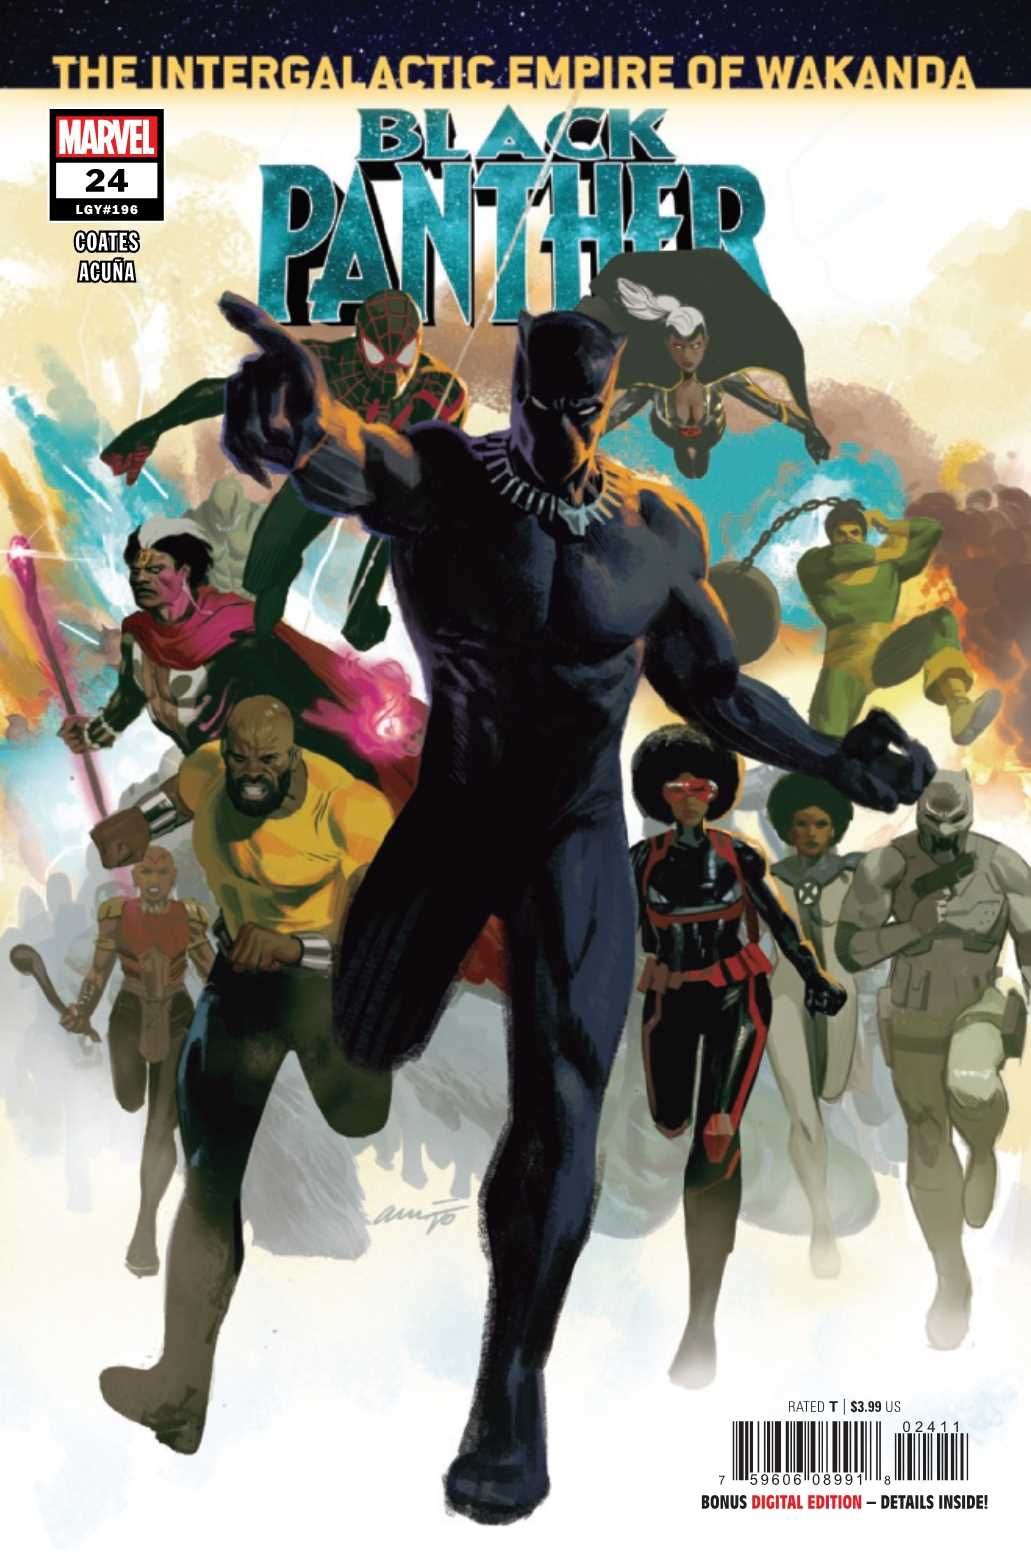 Black Panther Unites Marvel’s Heroes Of Color In A Cosmic Battle